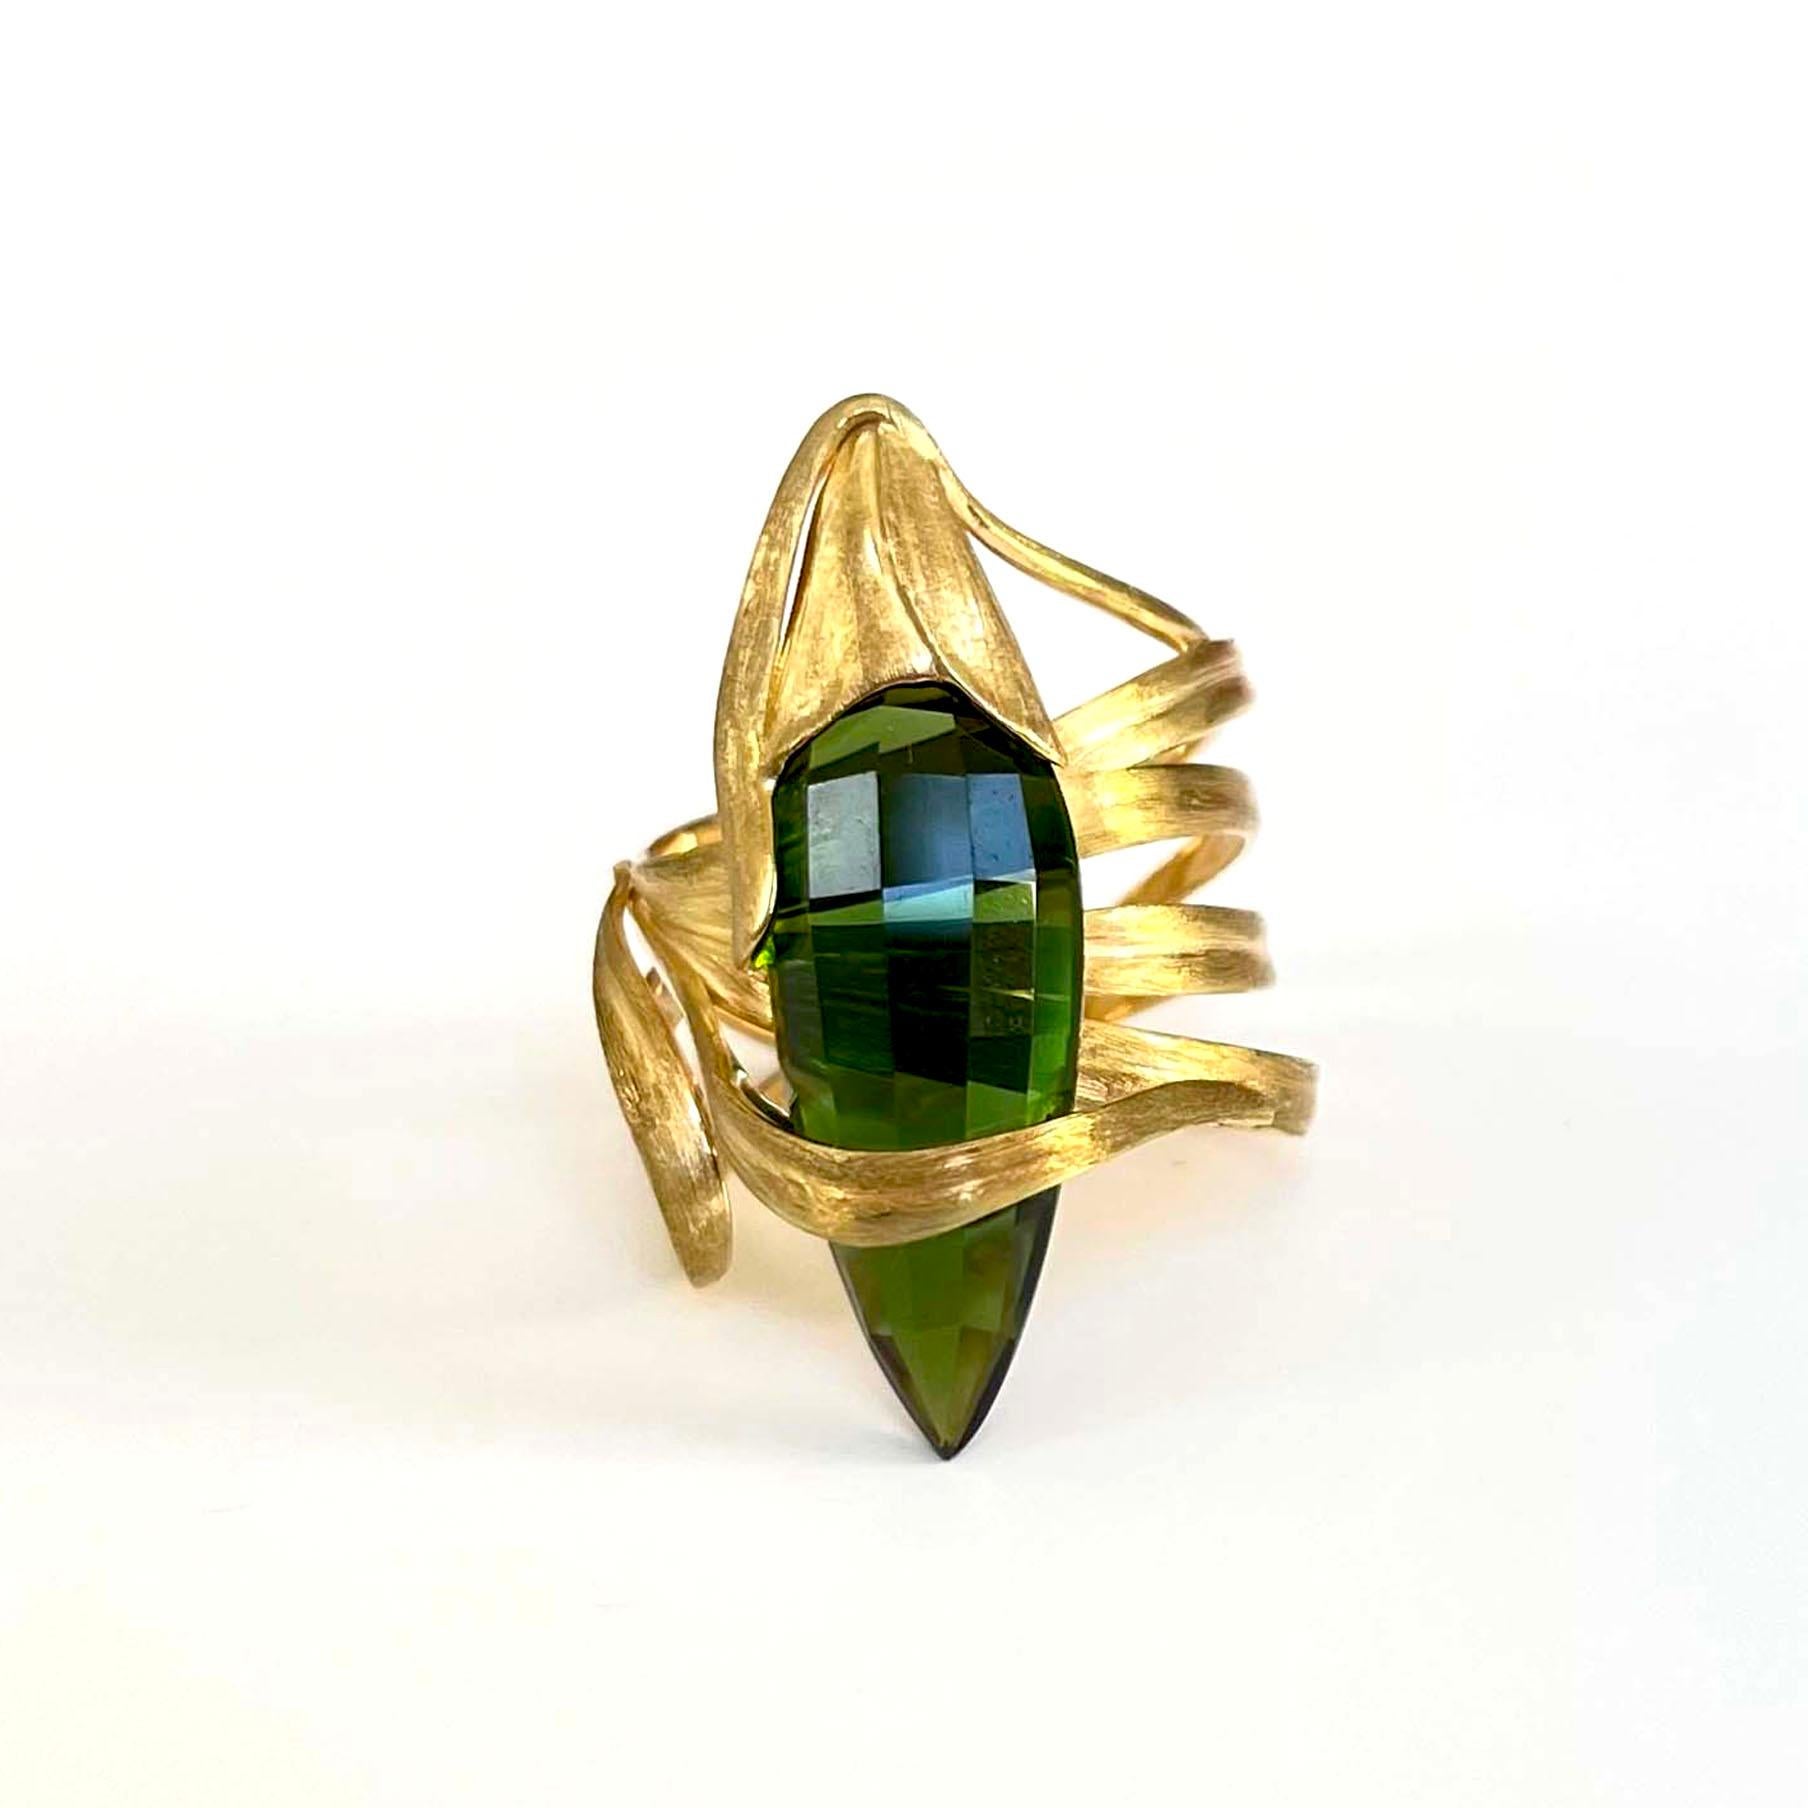 Produced by award winning Italian designer Stefano Vitolo. Stefano creates custom artisanal one of a kind jewelry with excellent gemstones in a truly old world Italian craftmanship. This handcrafted ring has 9.89 carat Green Tourmaline.
